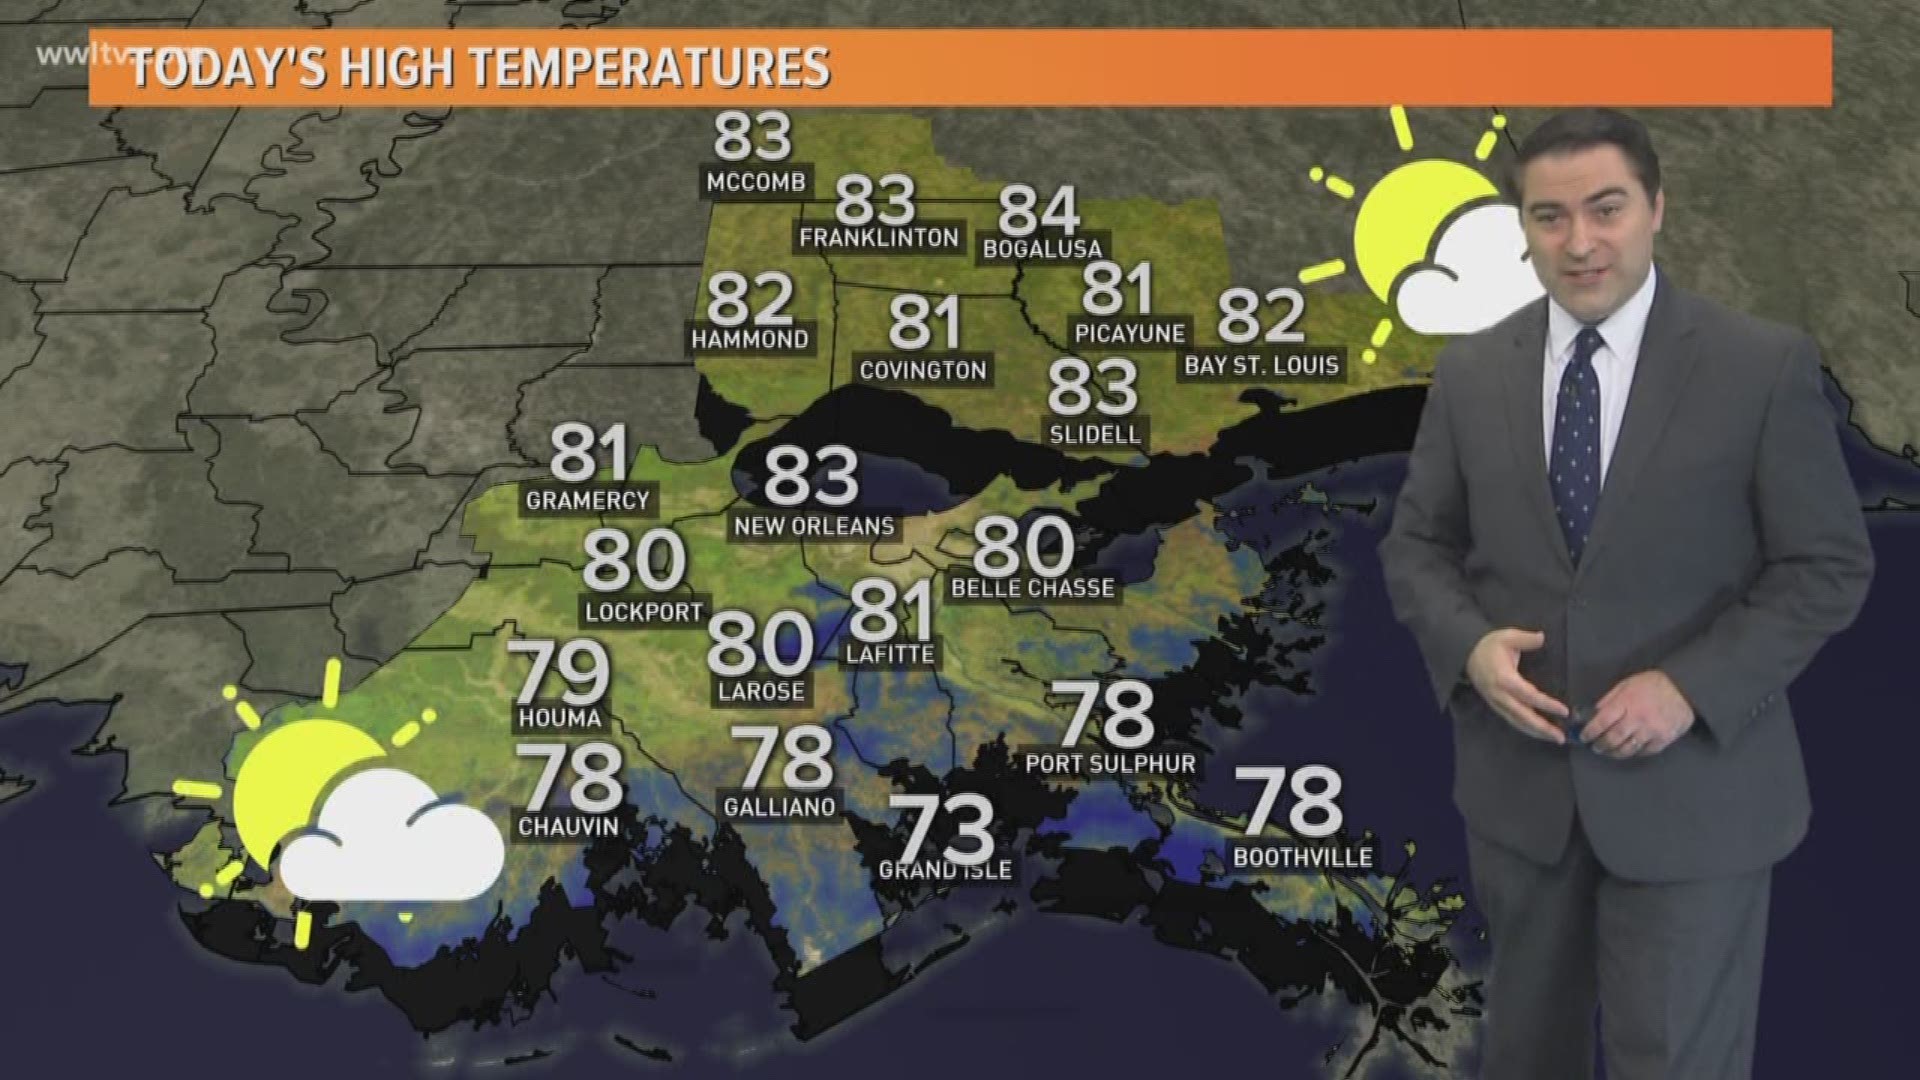 Meteorologist Dave Nussbaum says it will be a warm and breezy day with a cold front moving through tonight.